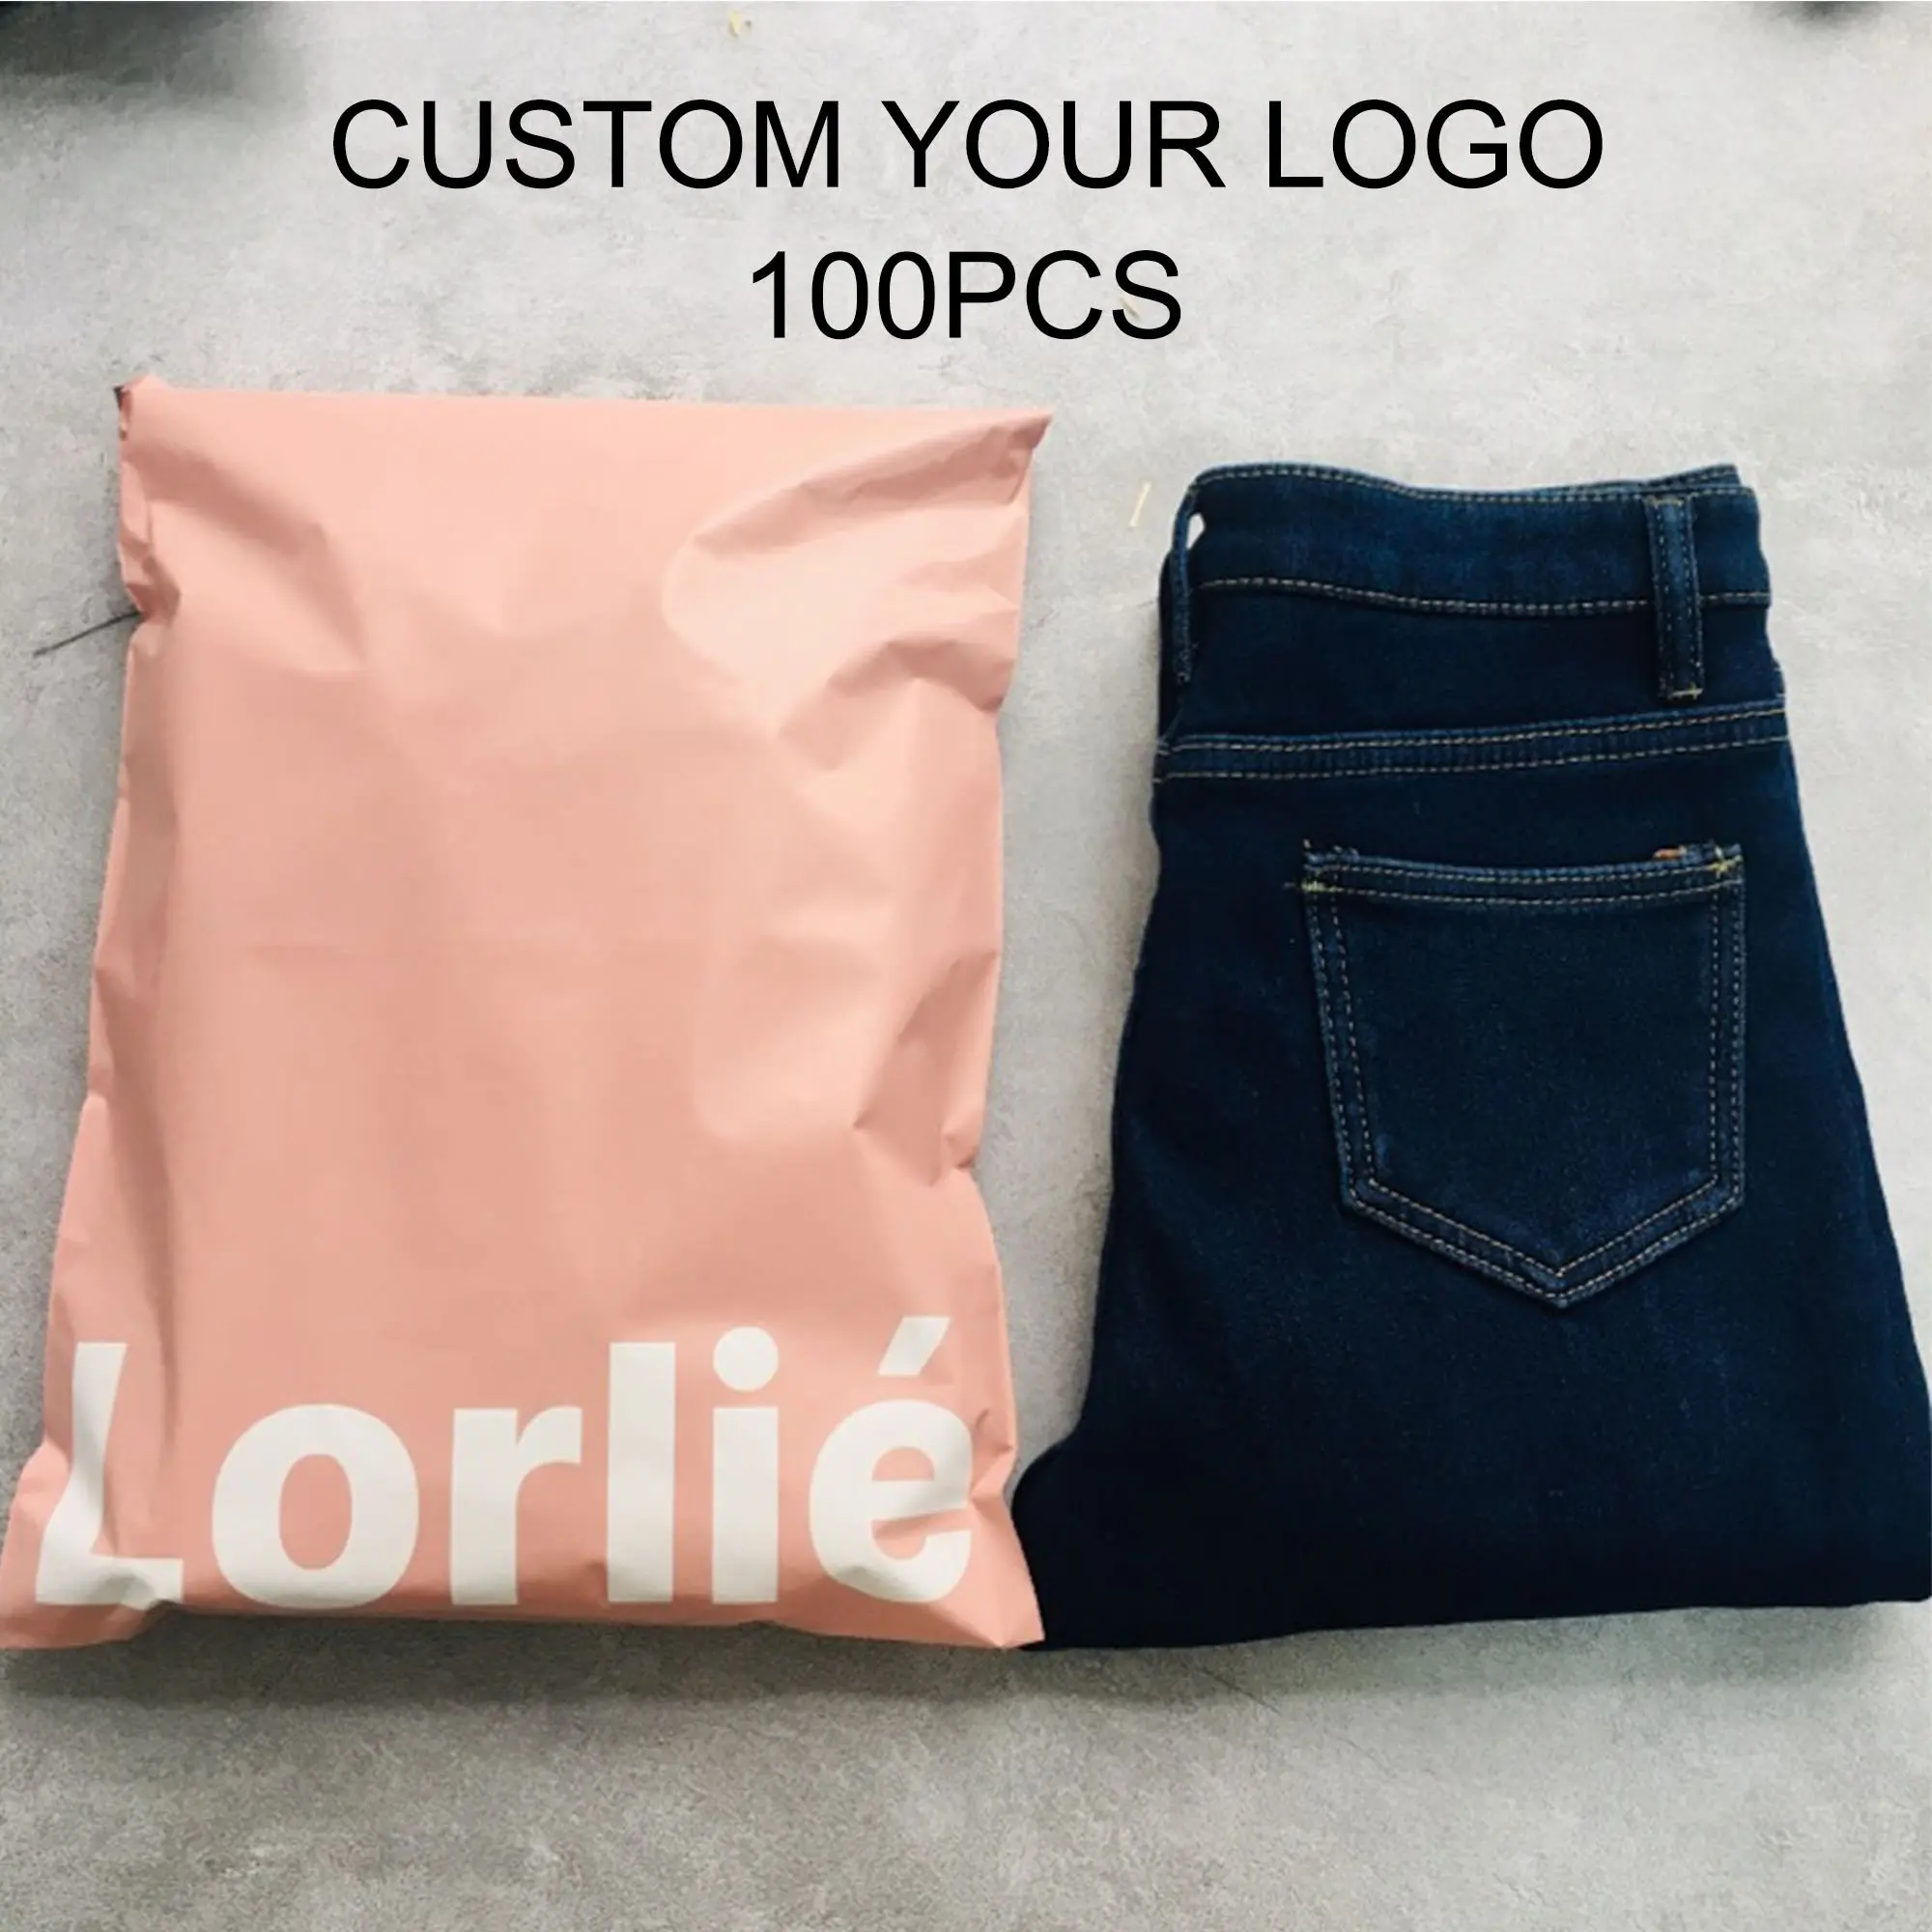 100 Custom logo colored Poly Mailers Courier storage Postal Bags Gift Packaging Padded Shipping Envelopes custom Hoodies